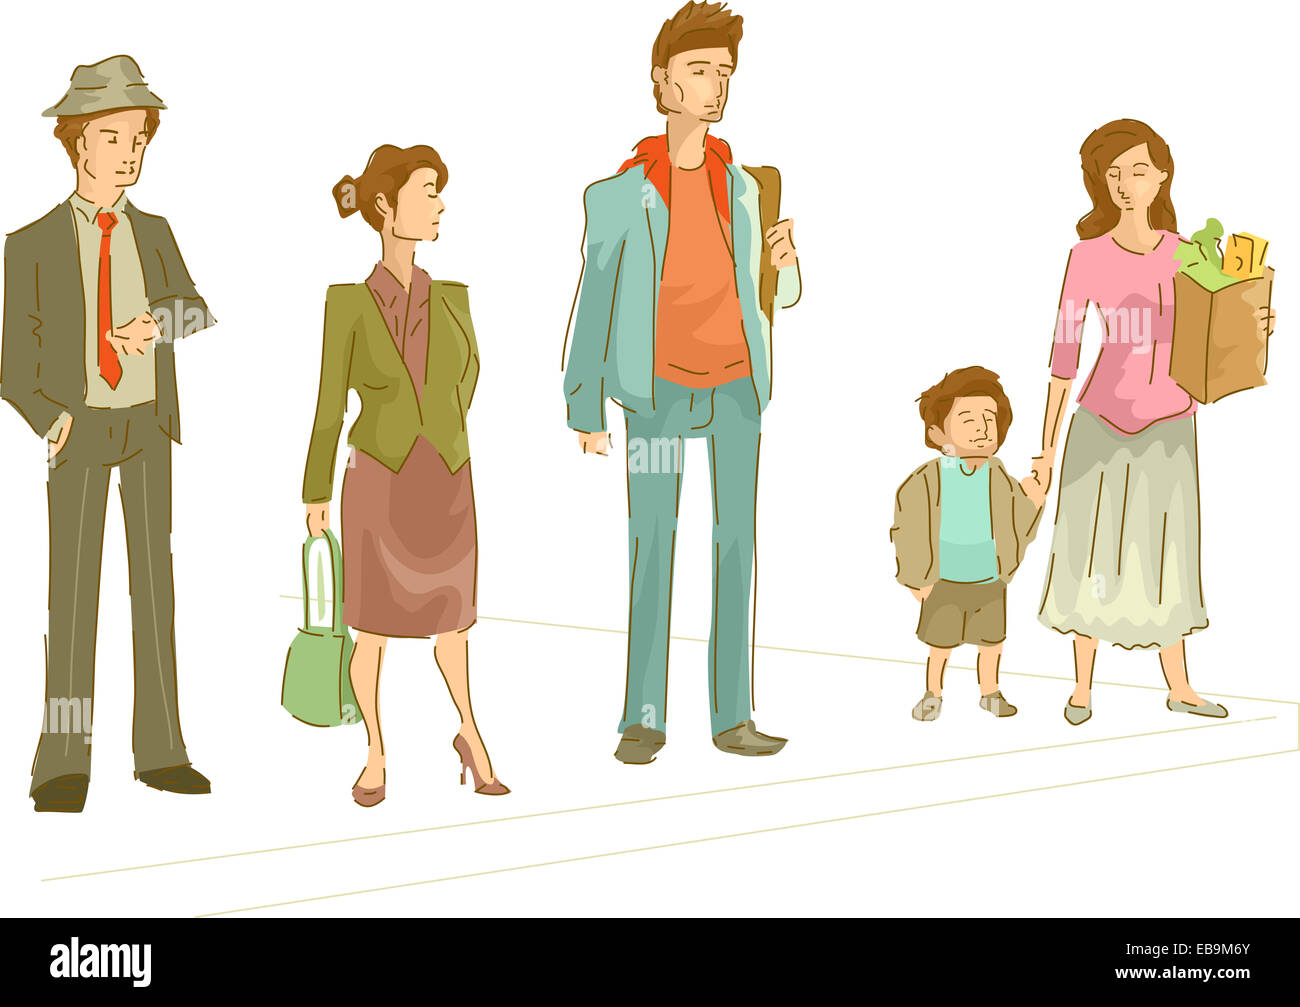 Illustration Featuring a Group of People Waiting at a Pedestrian Lane Stock Photo